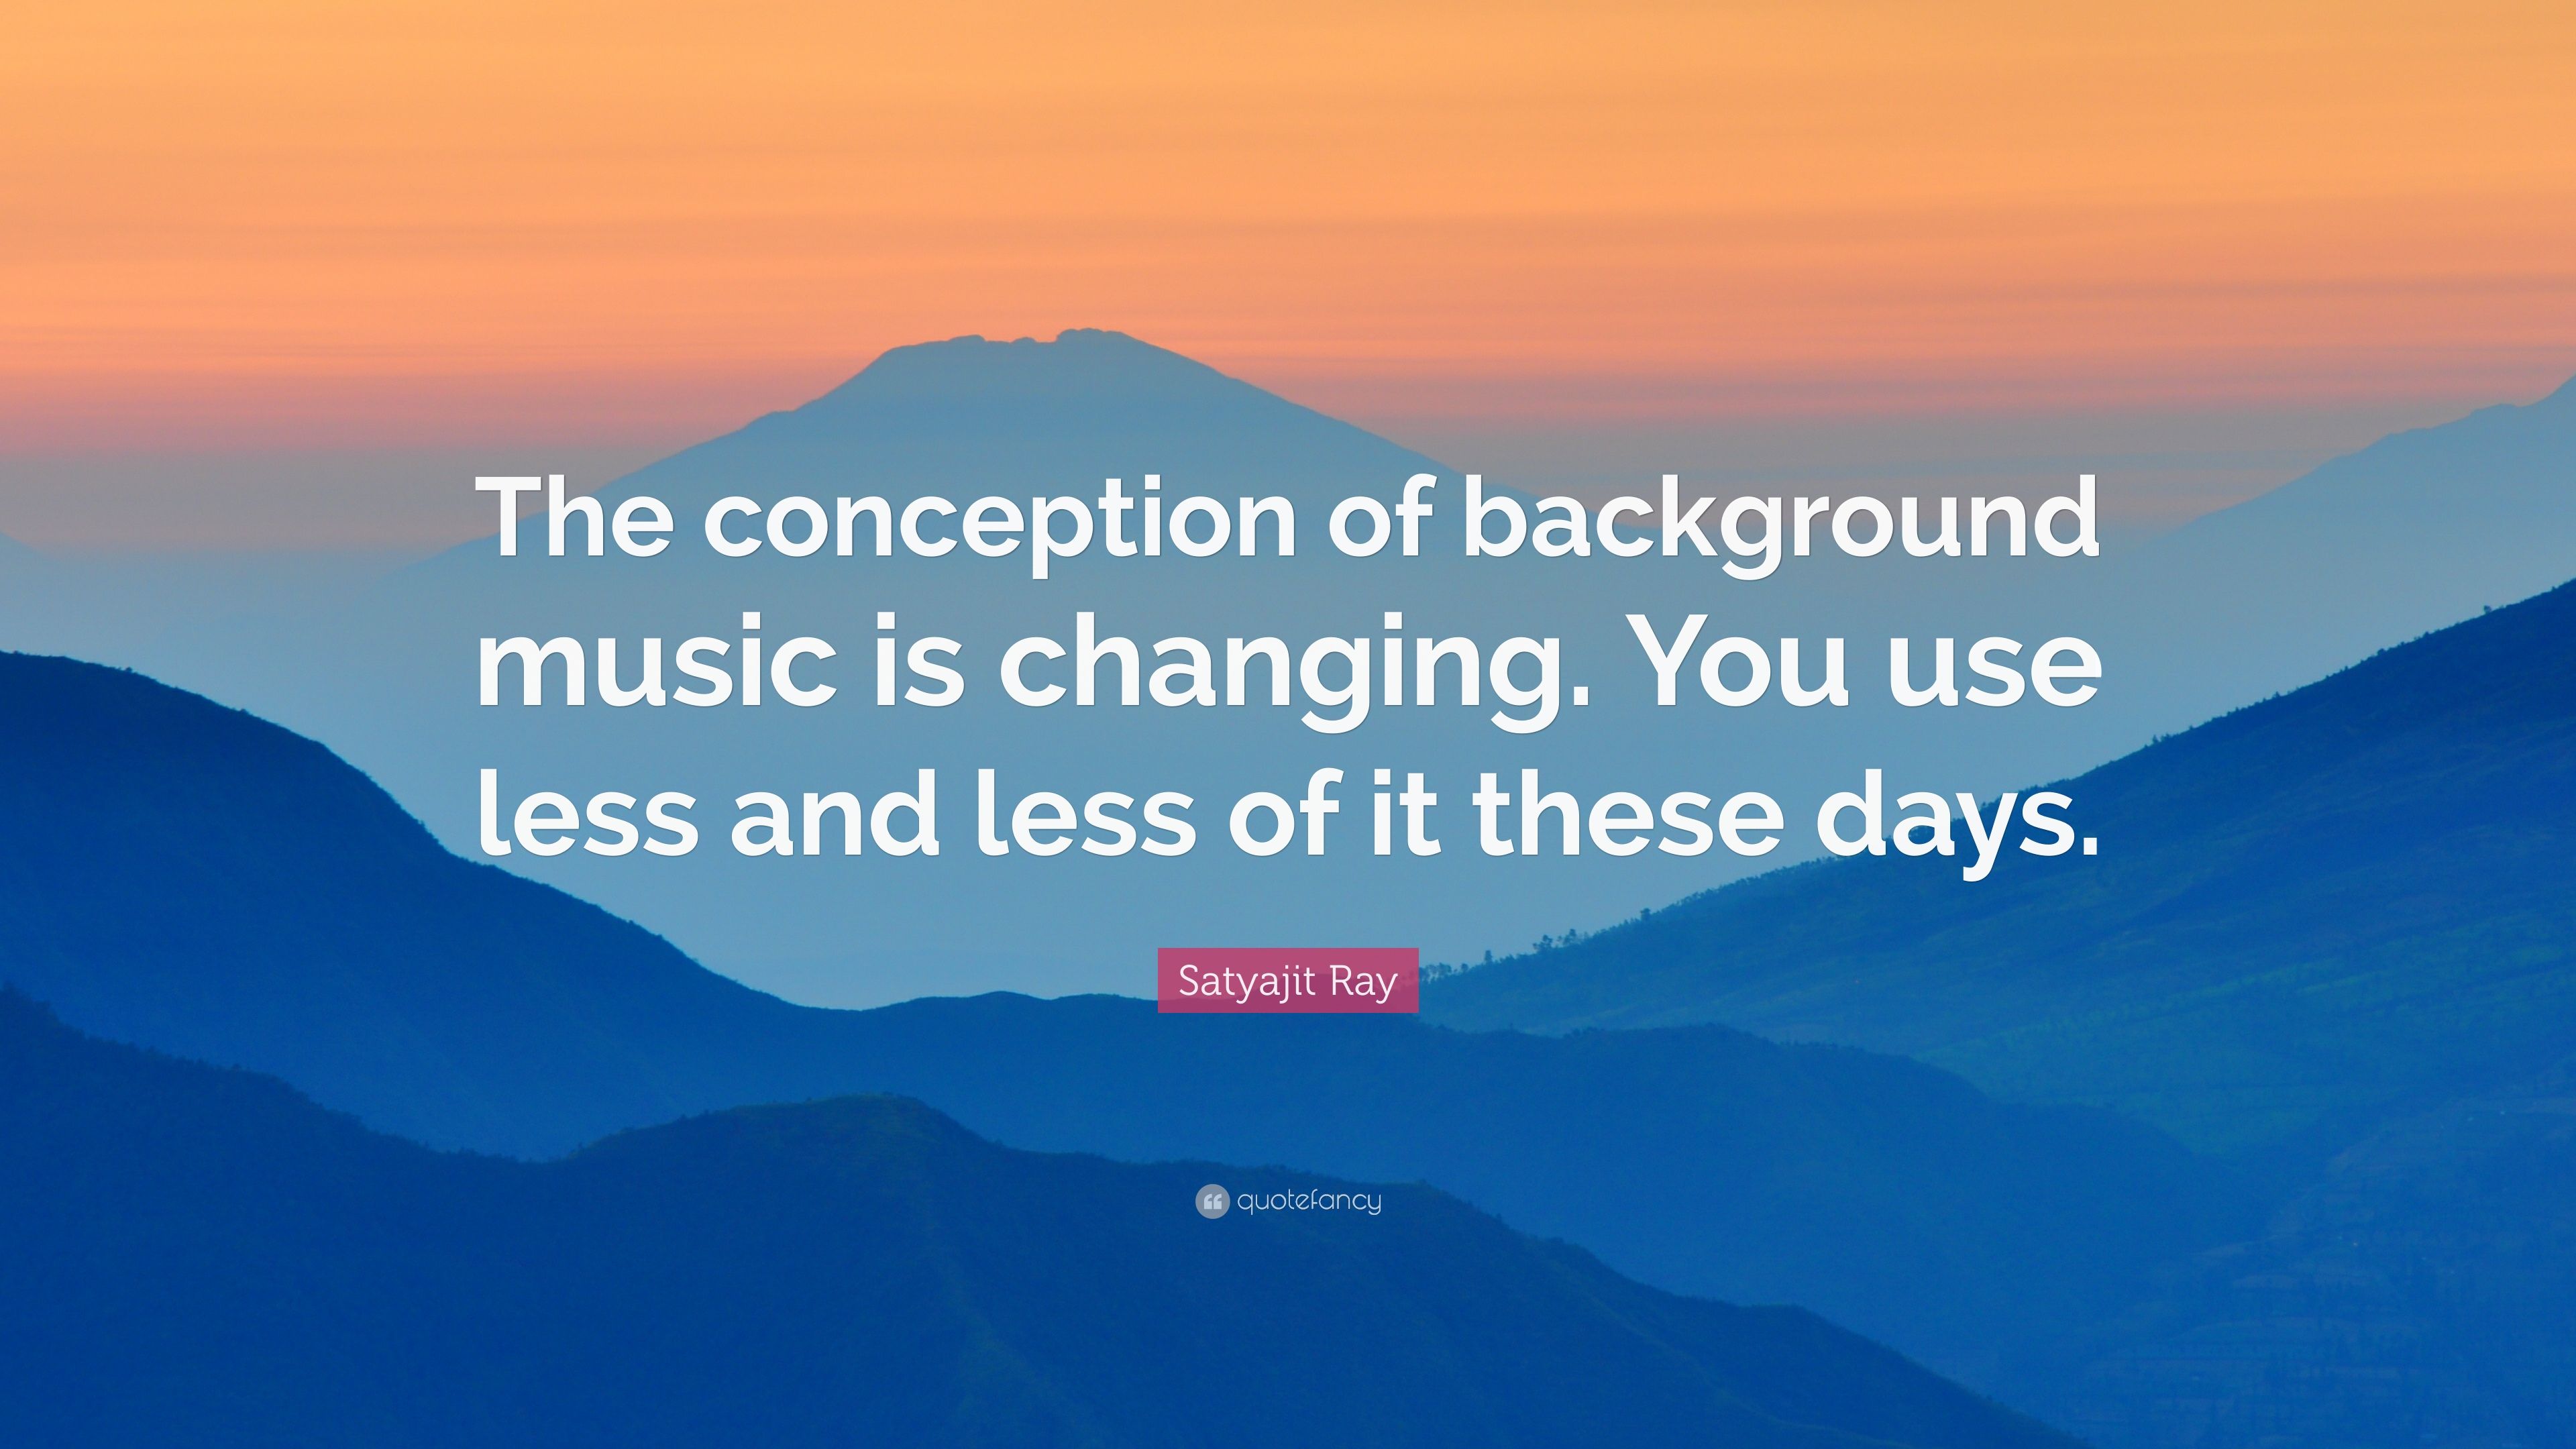 Satyajit Ray Quote: “The conception of background music is